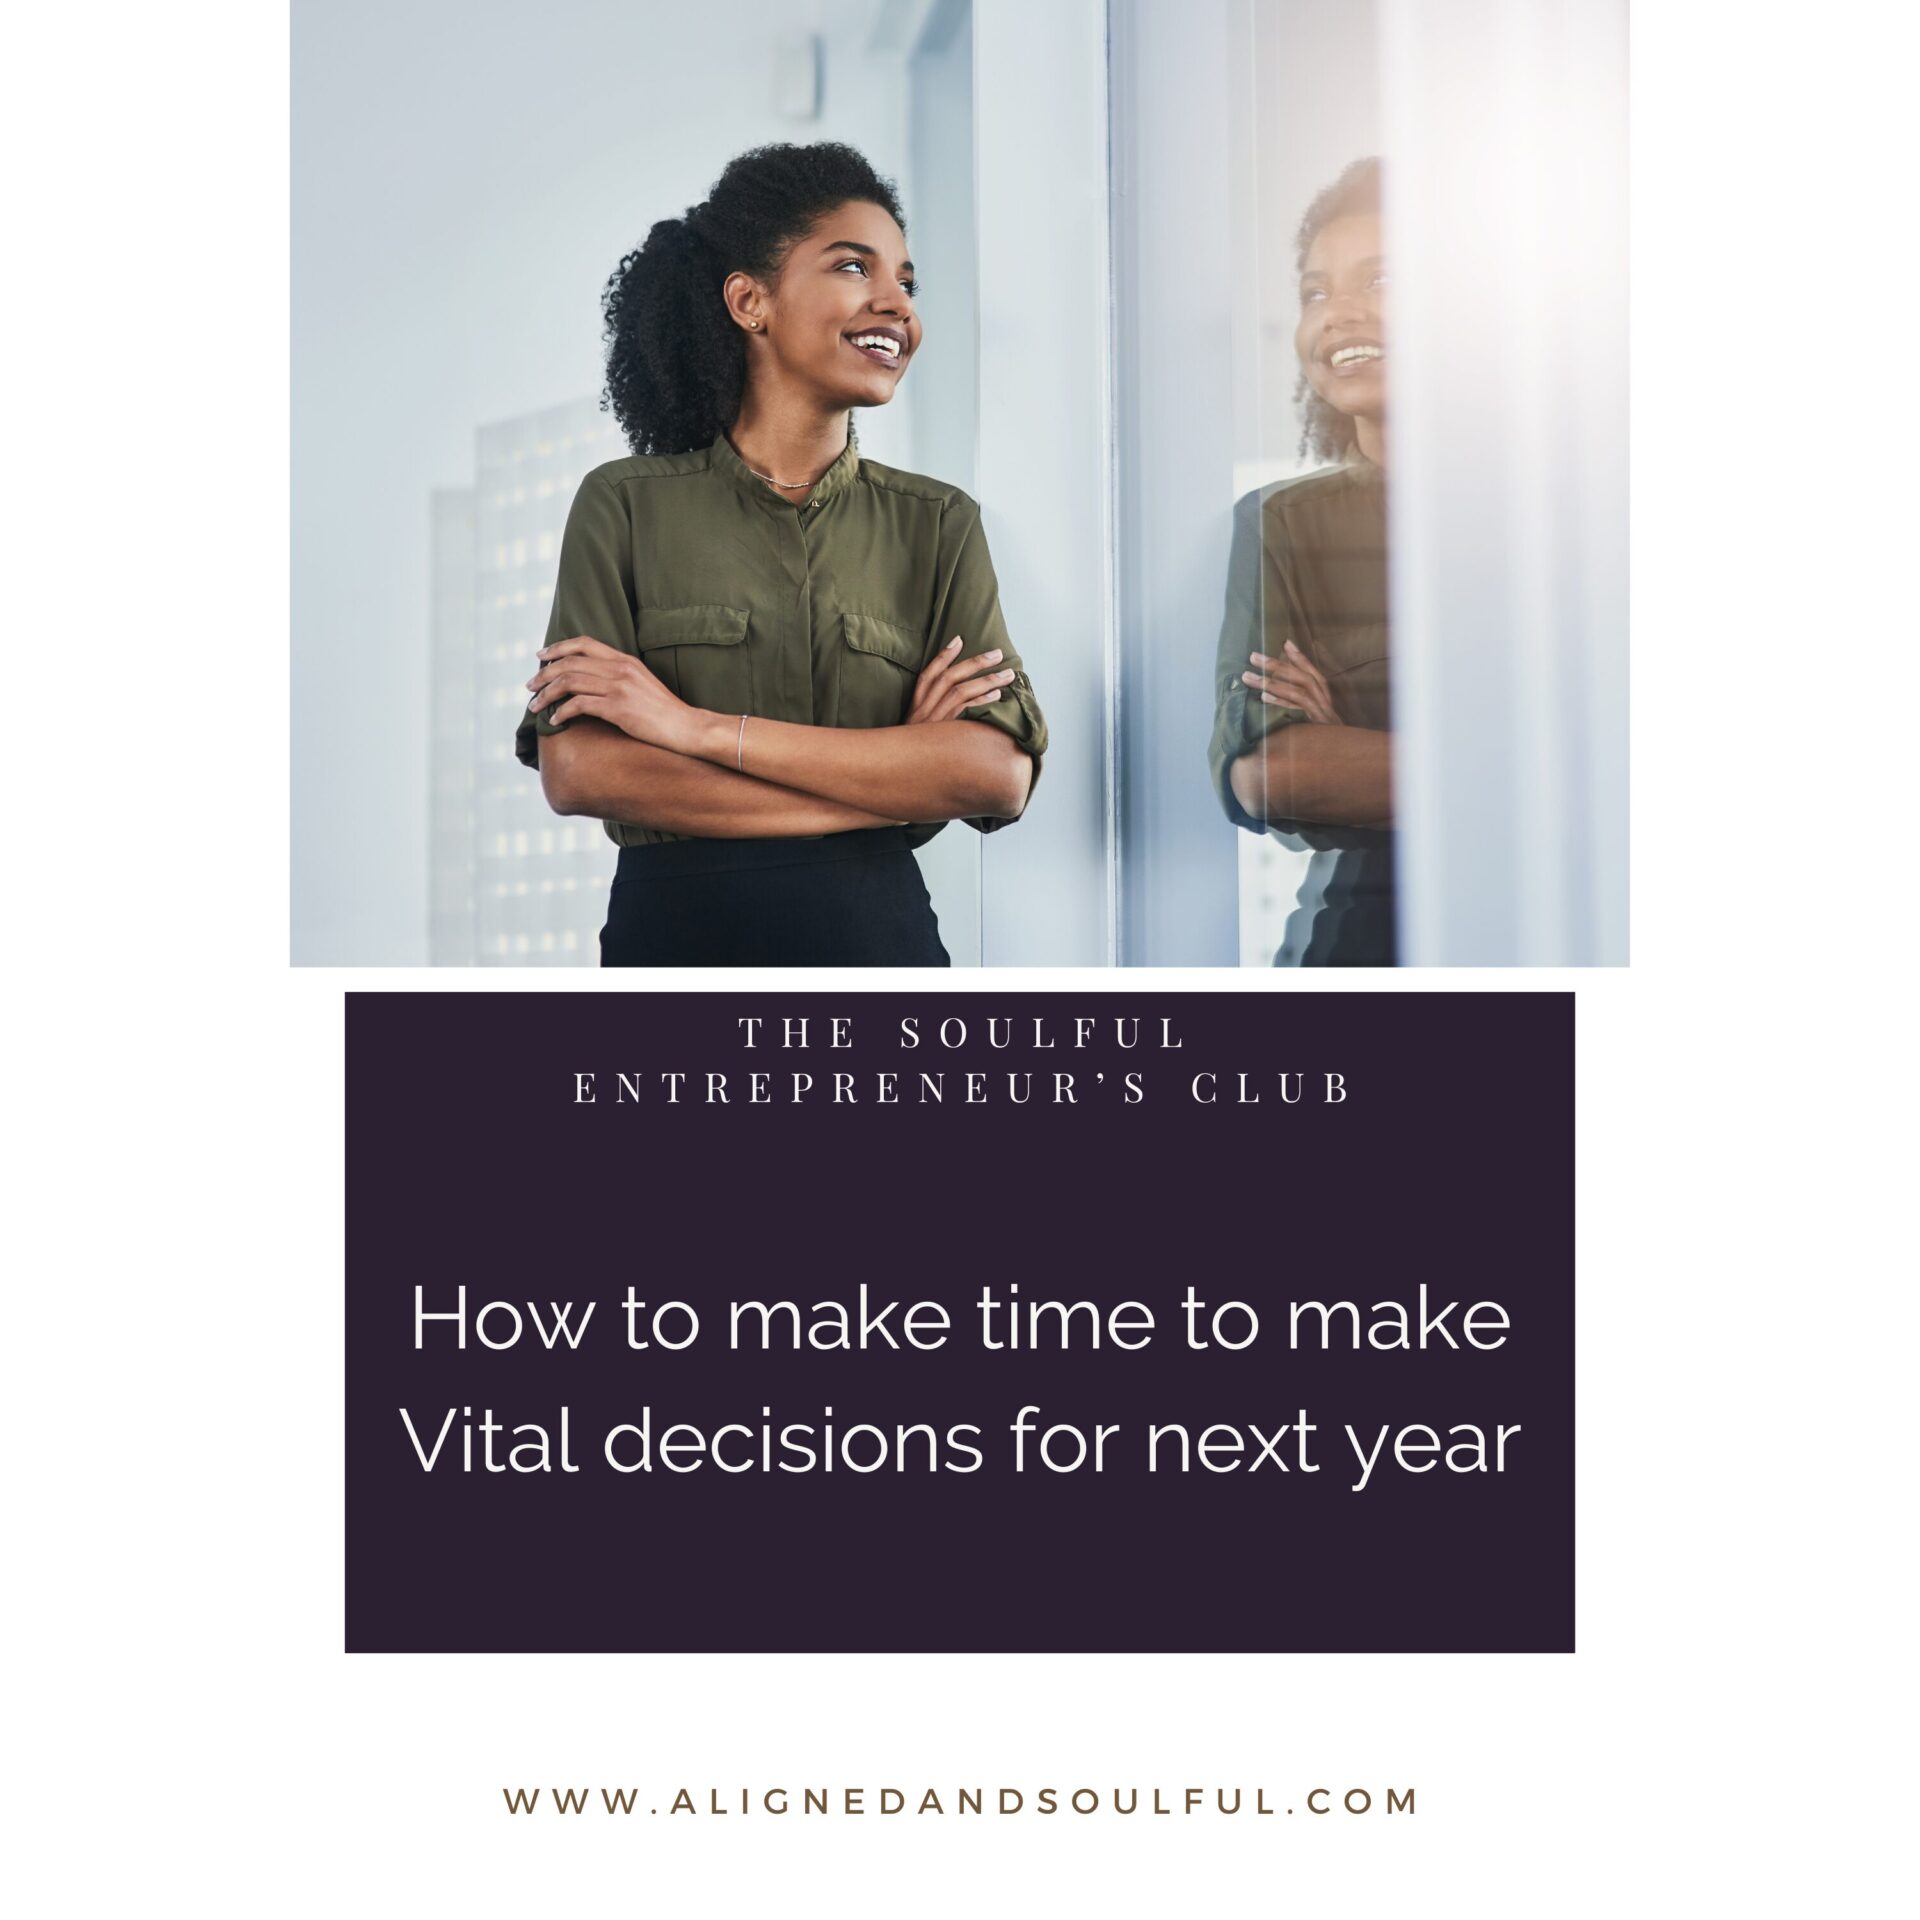 How to make time to make Vital decisions for next year